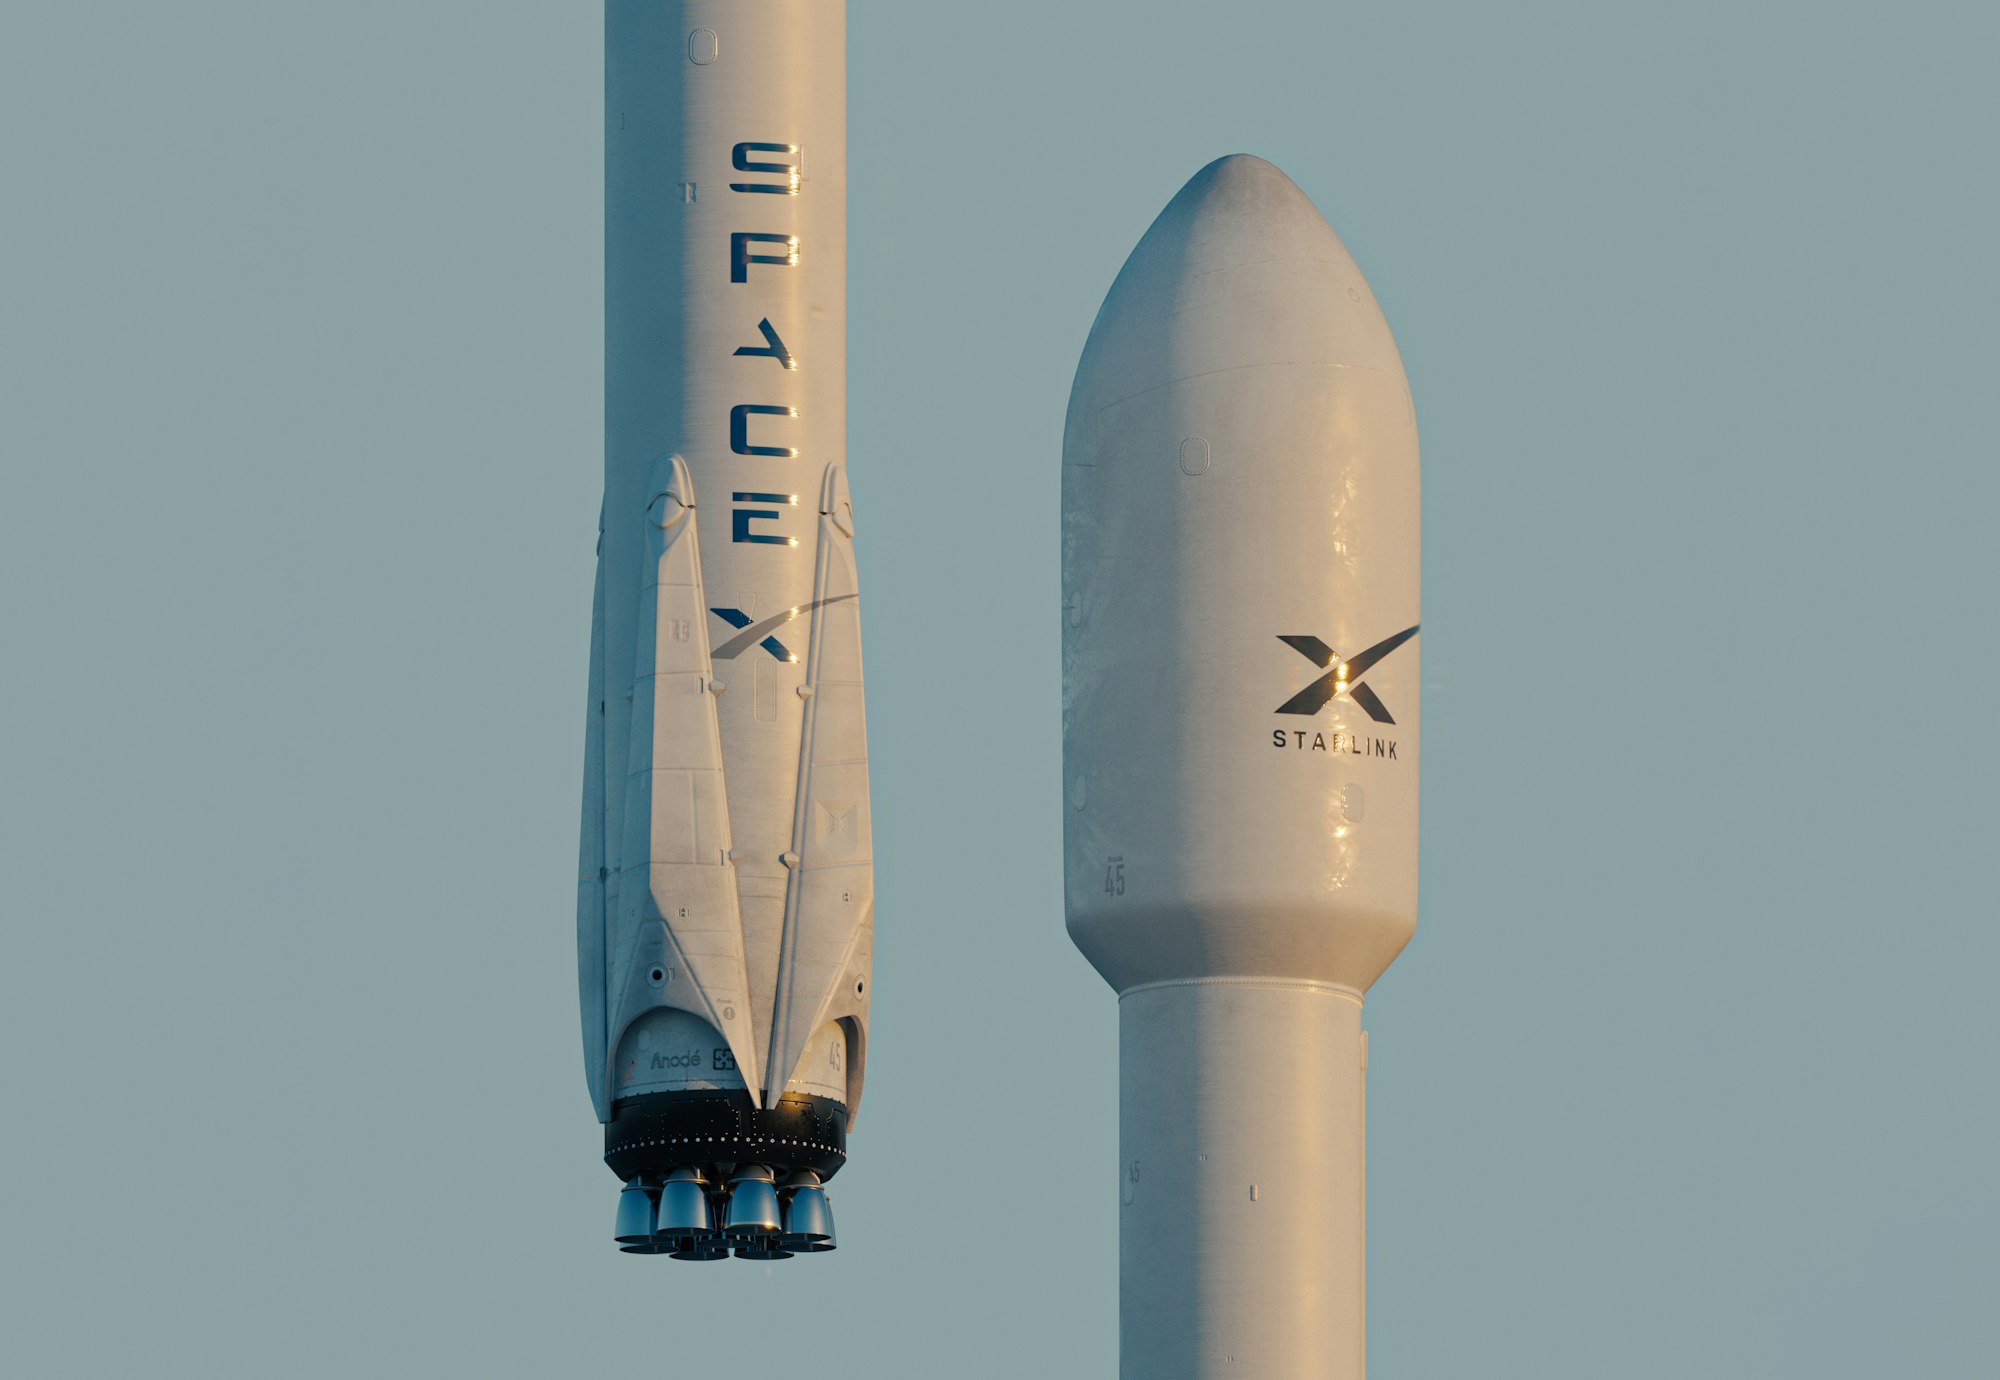 The SpaceX Falcon 9